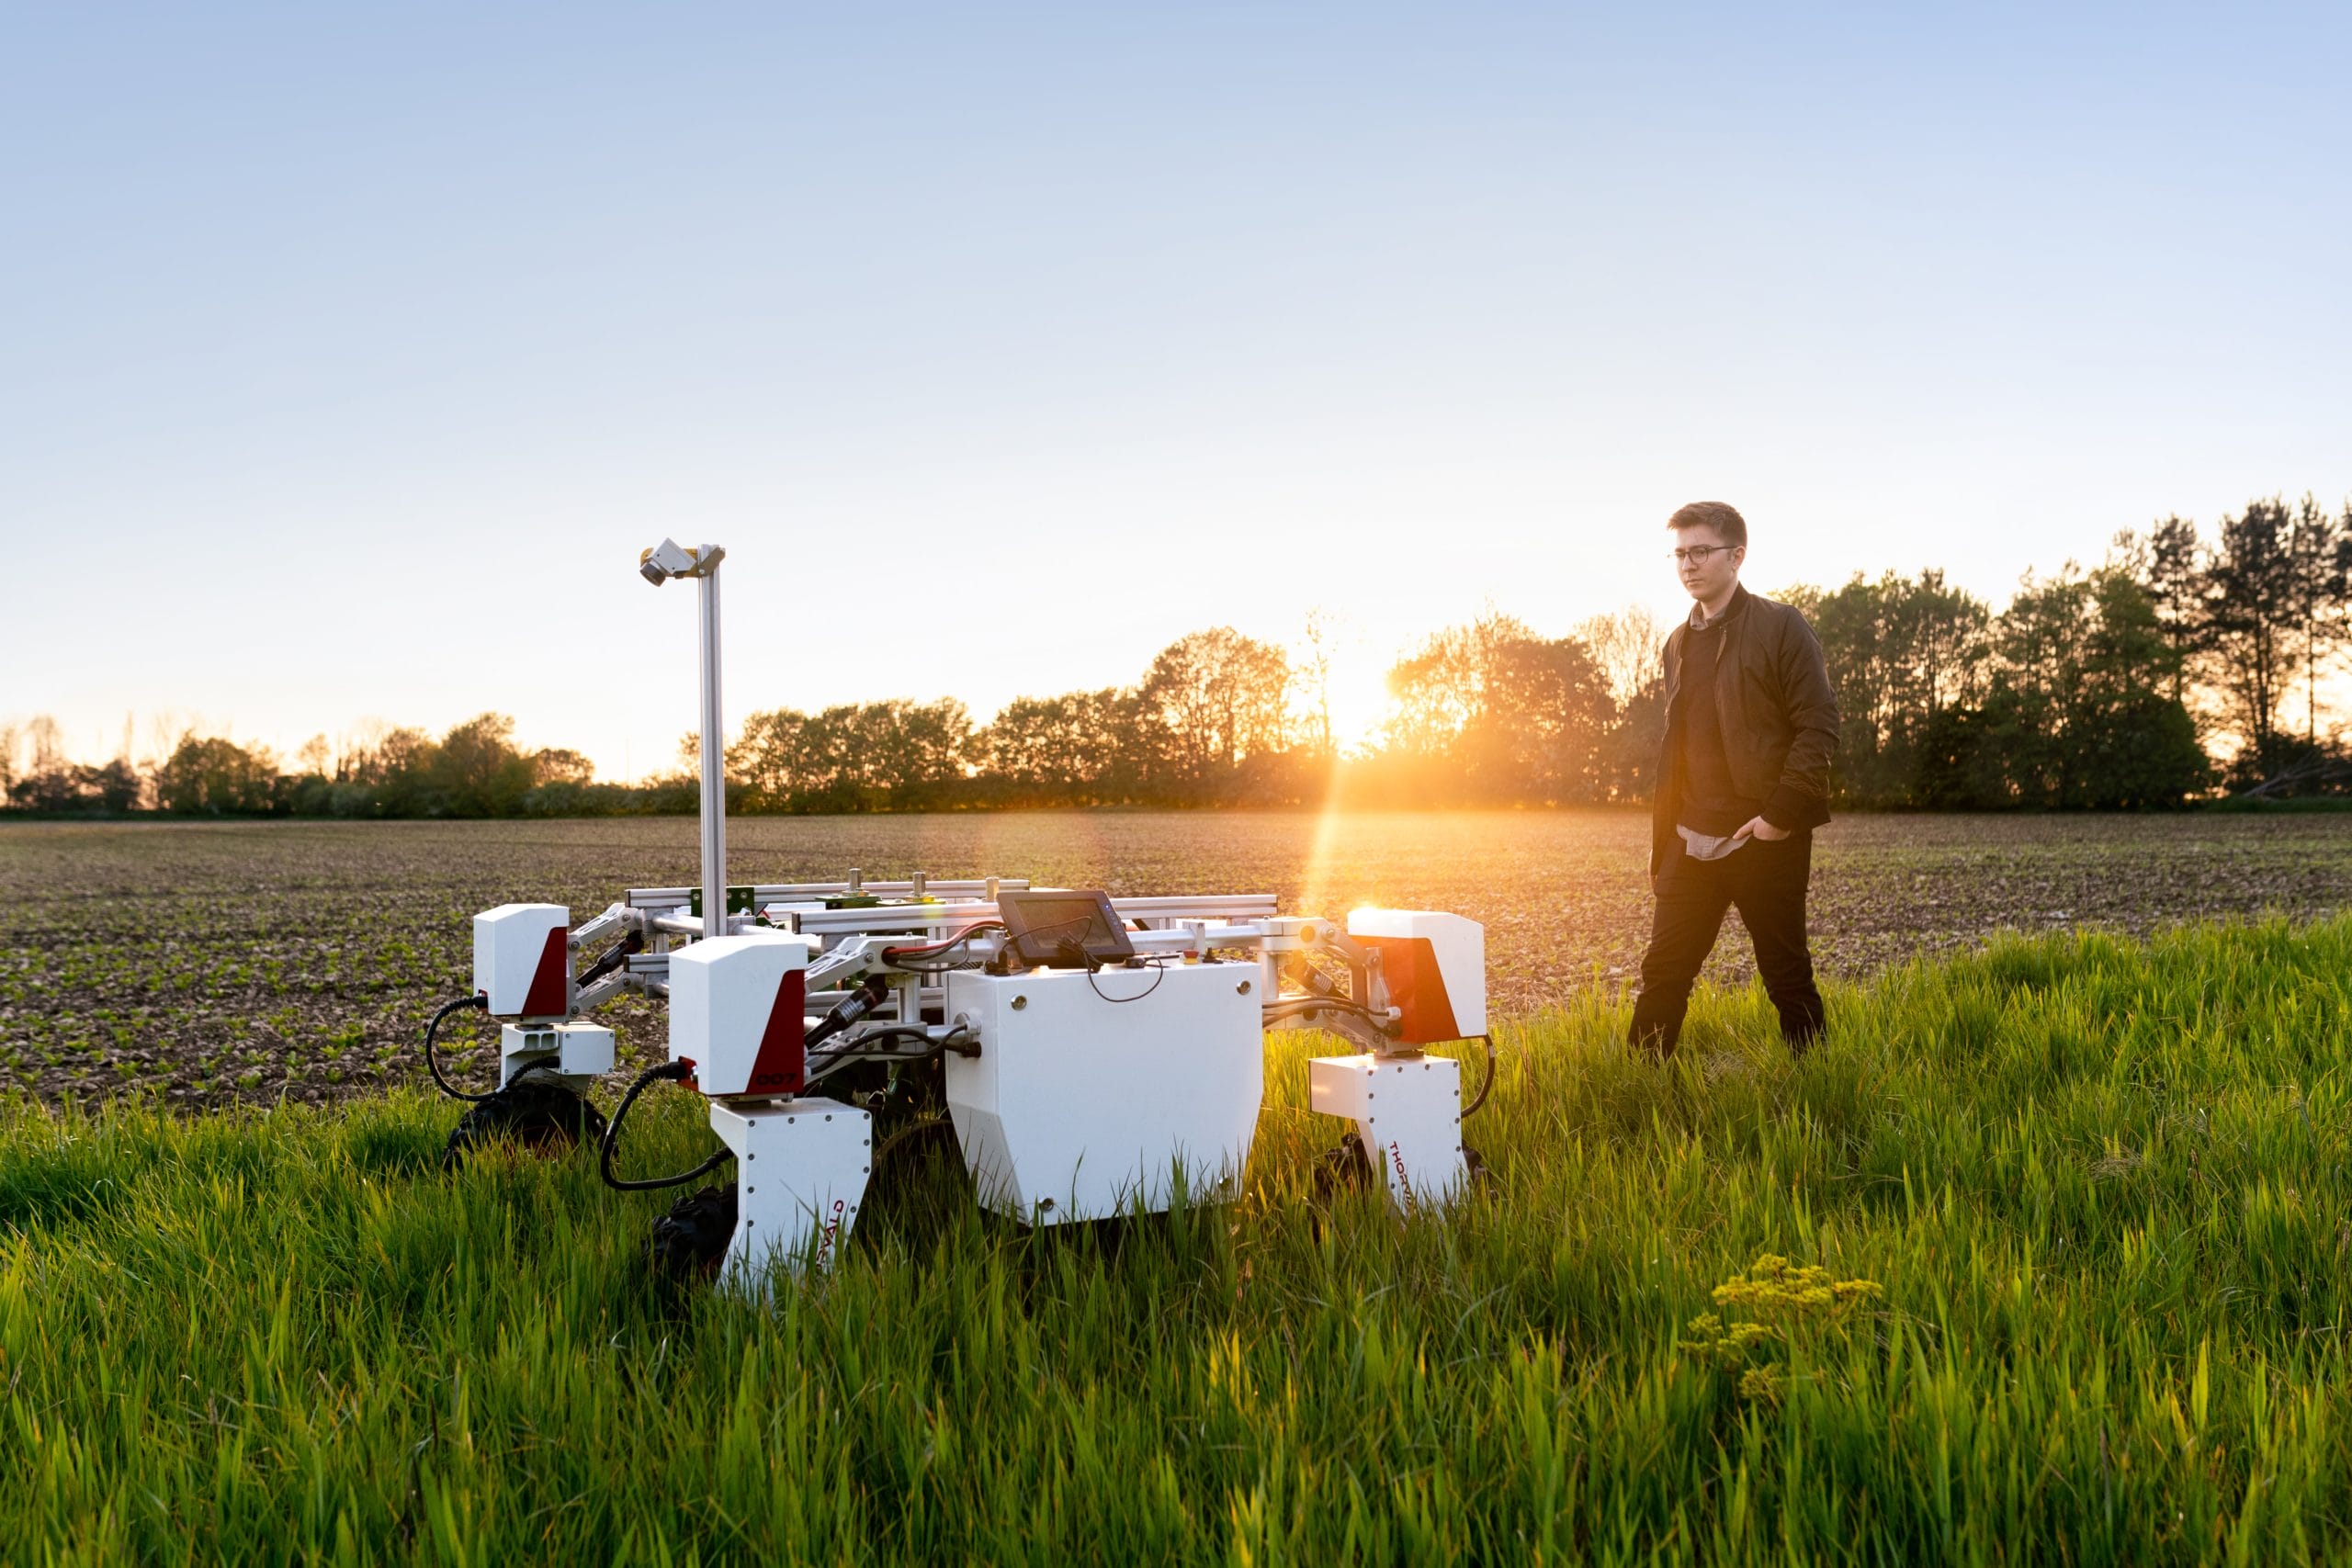 Terramera Awarded $2.5 Million to Develop Cleaner Plant-Based Pest Control to Help Canadian Agriculture